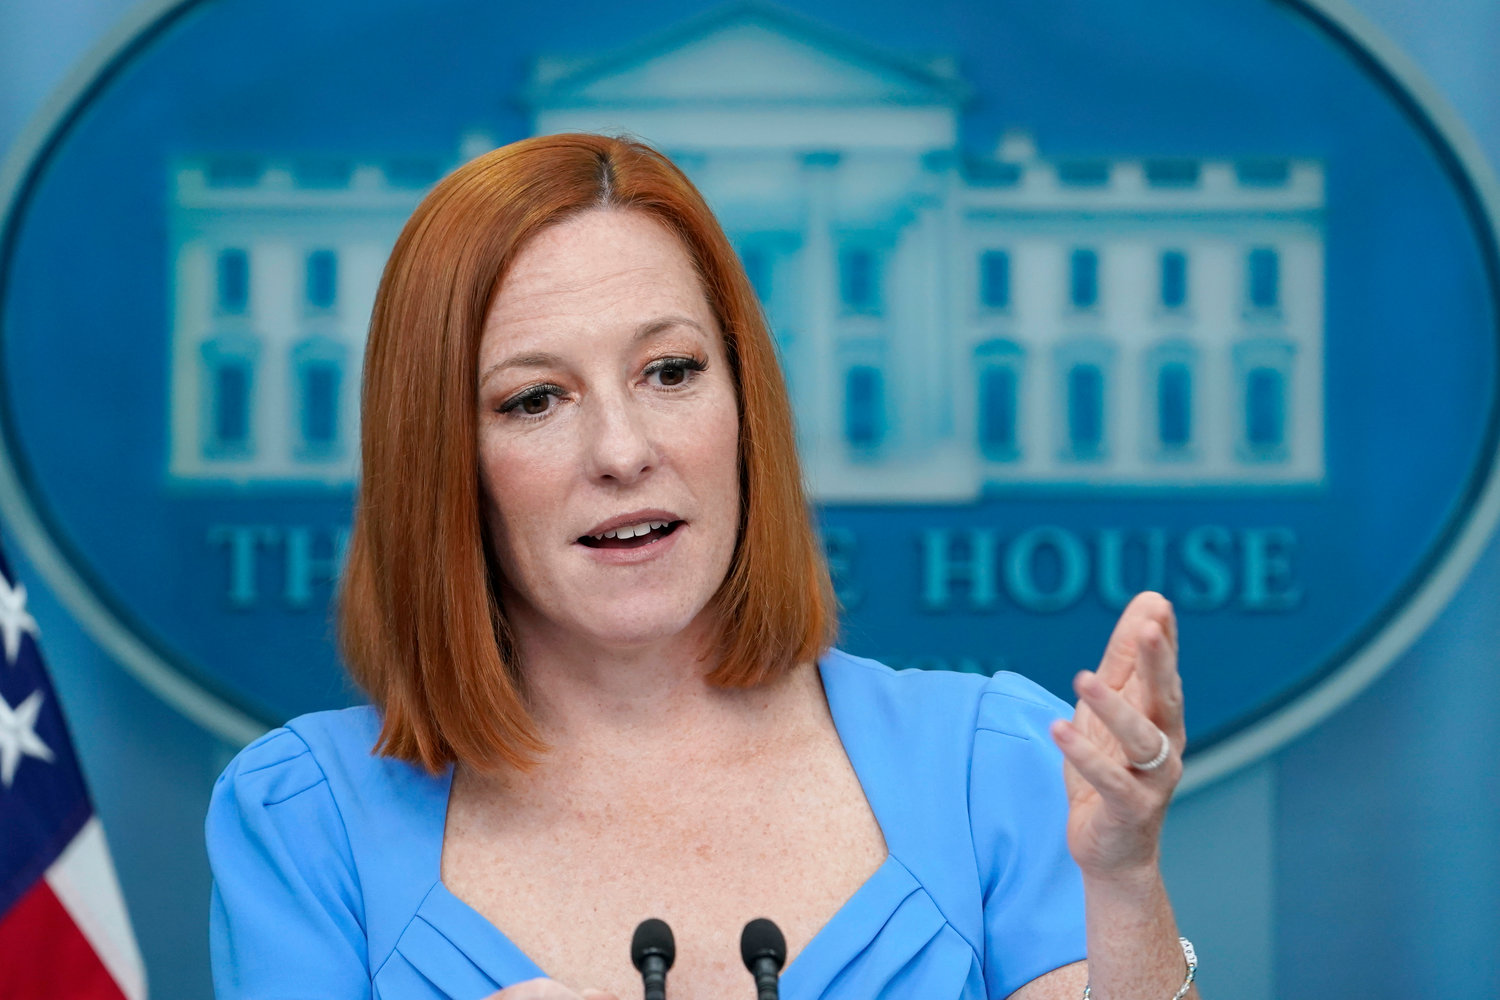 White House press secretary Jen Psaki speaks during the daily briefing at the White House in Washington, Thursday, May 12, 2022. (AP Photo/Susan Walsh)